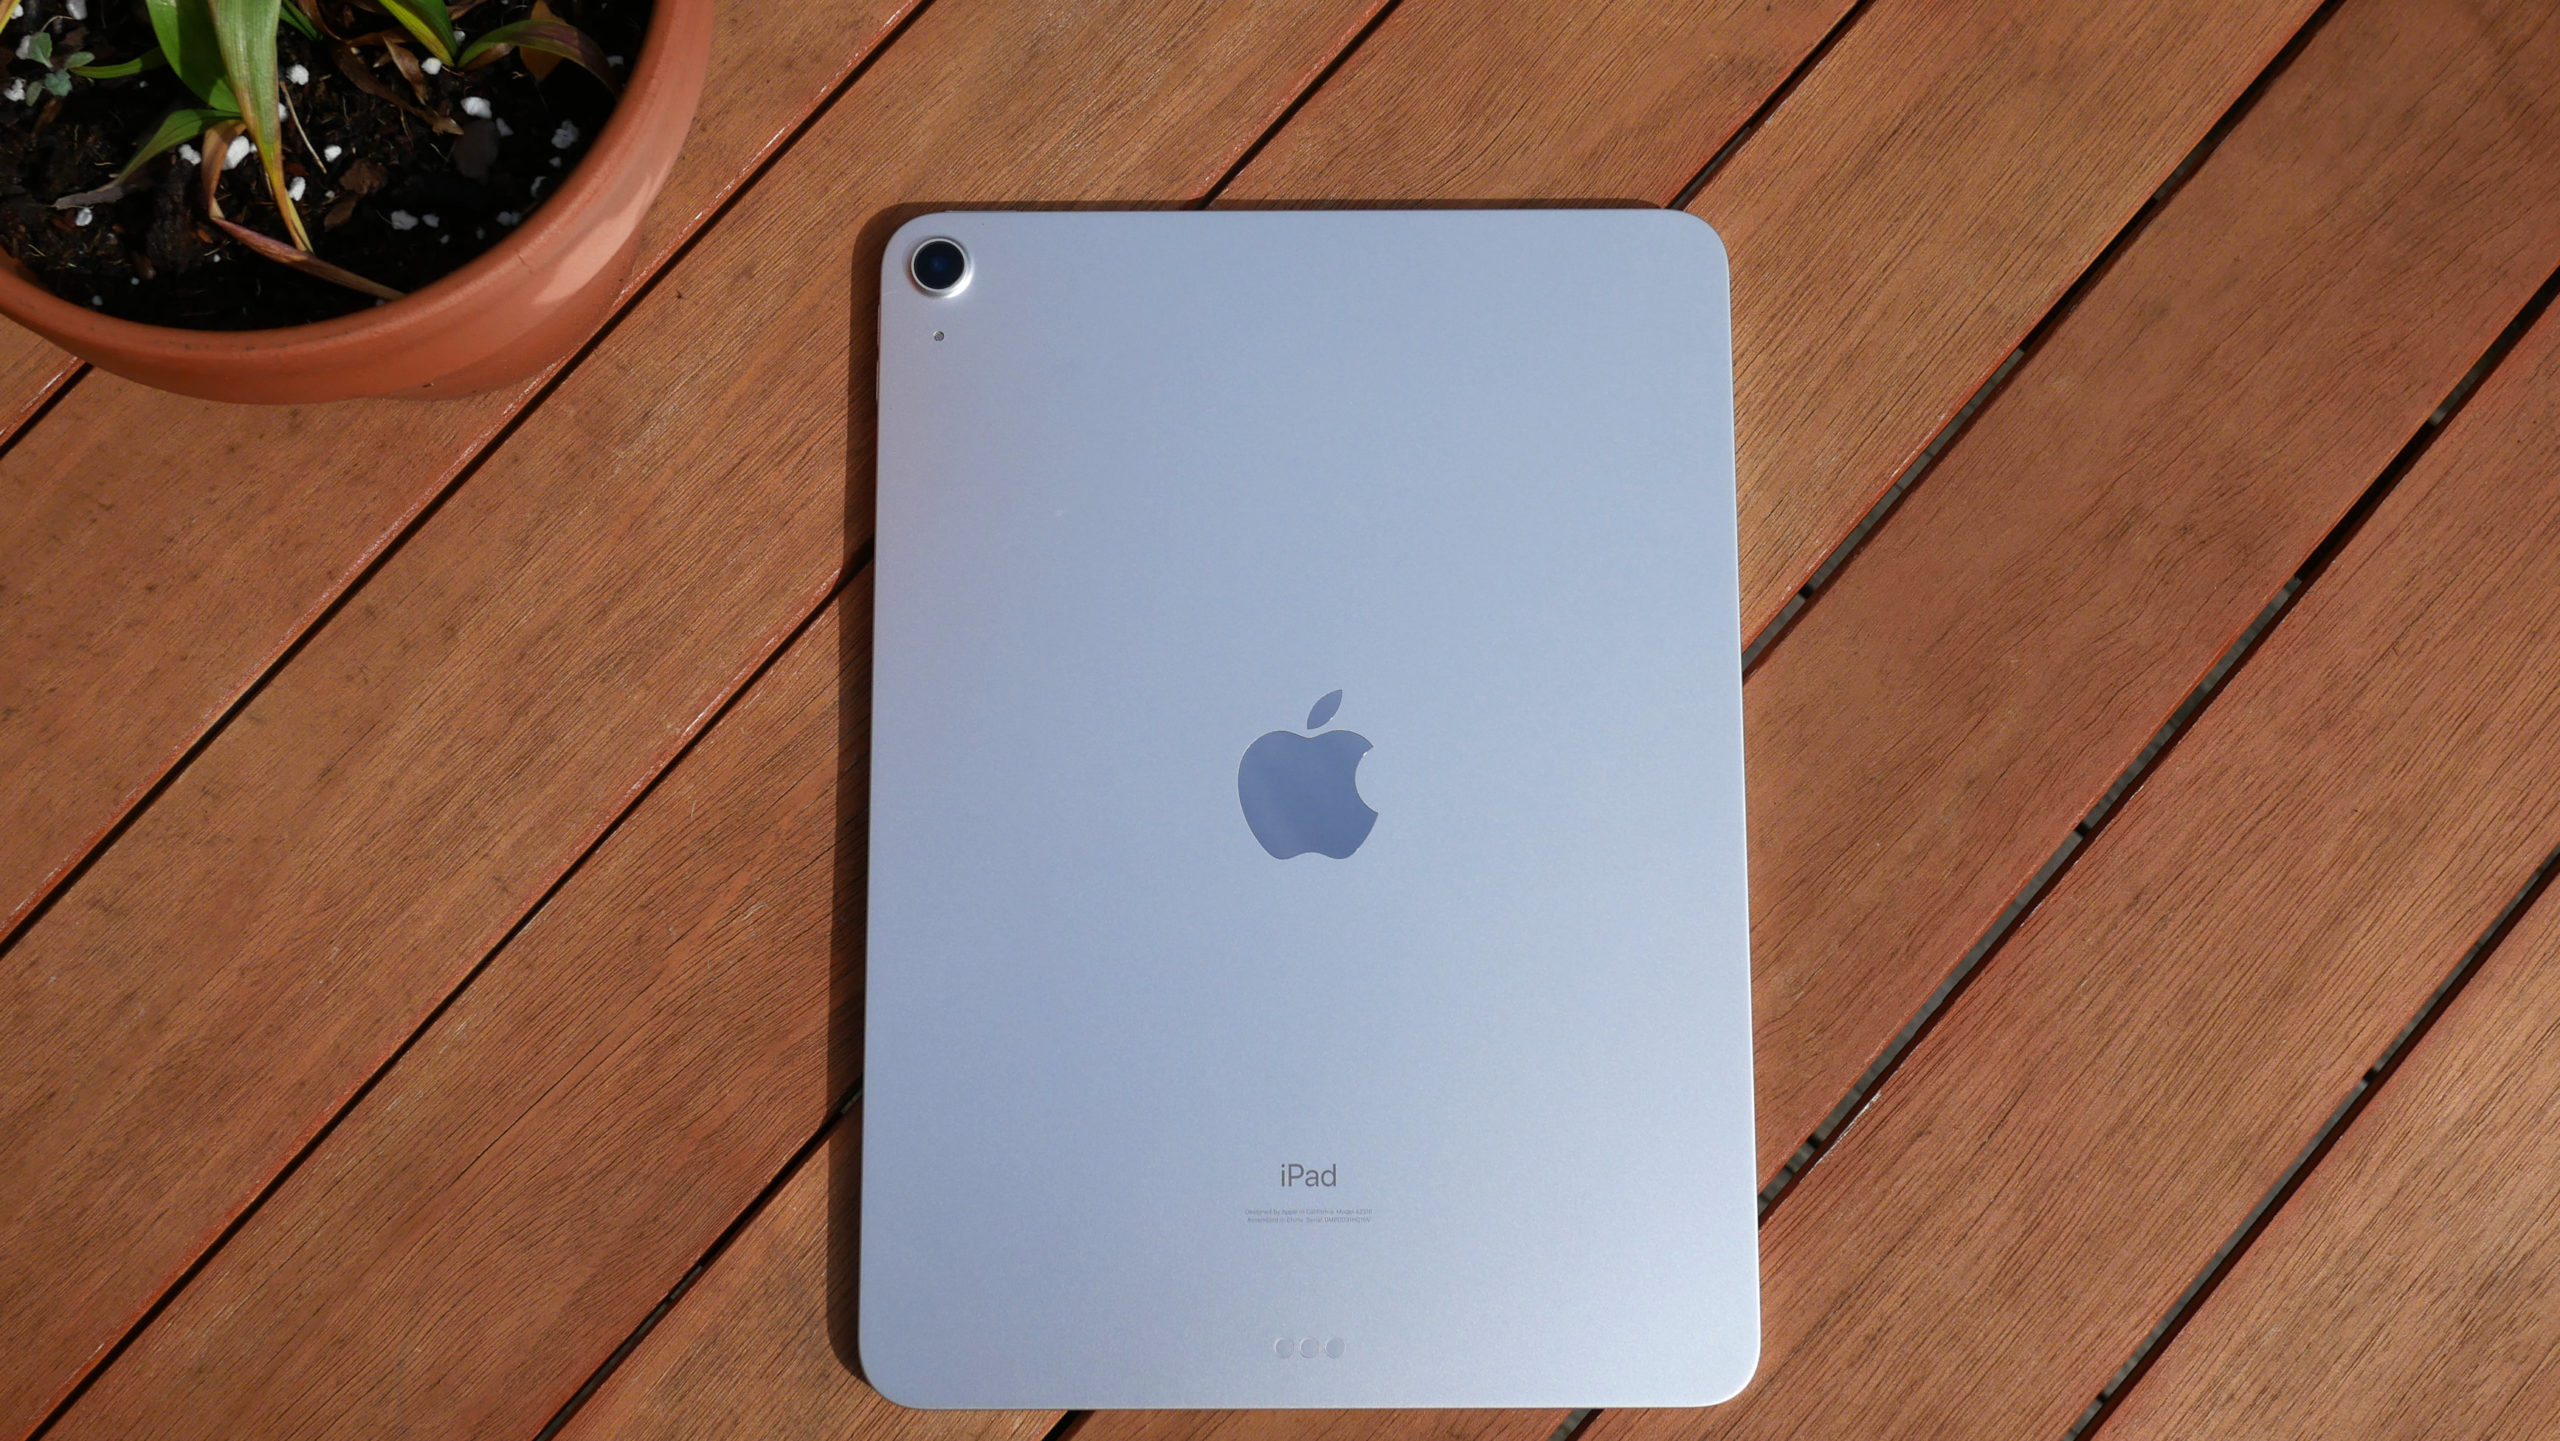 iPad models to debut by Apple